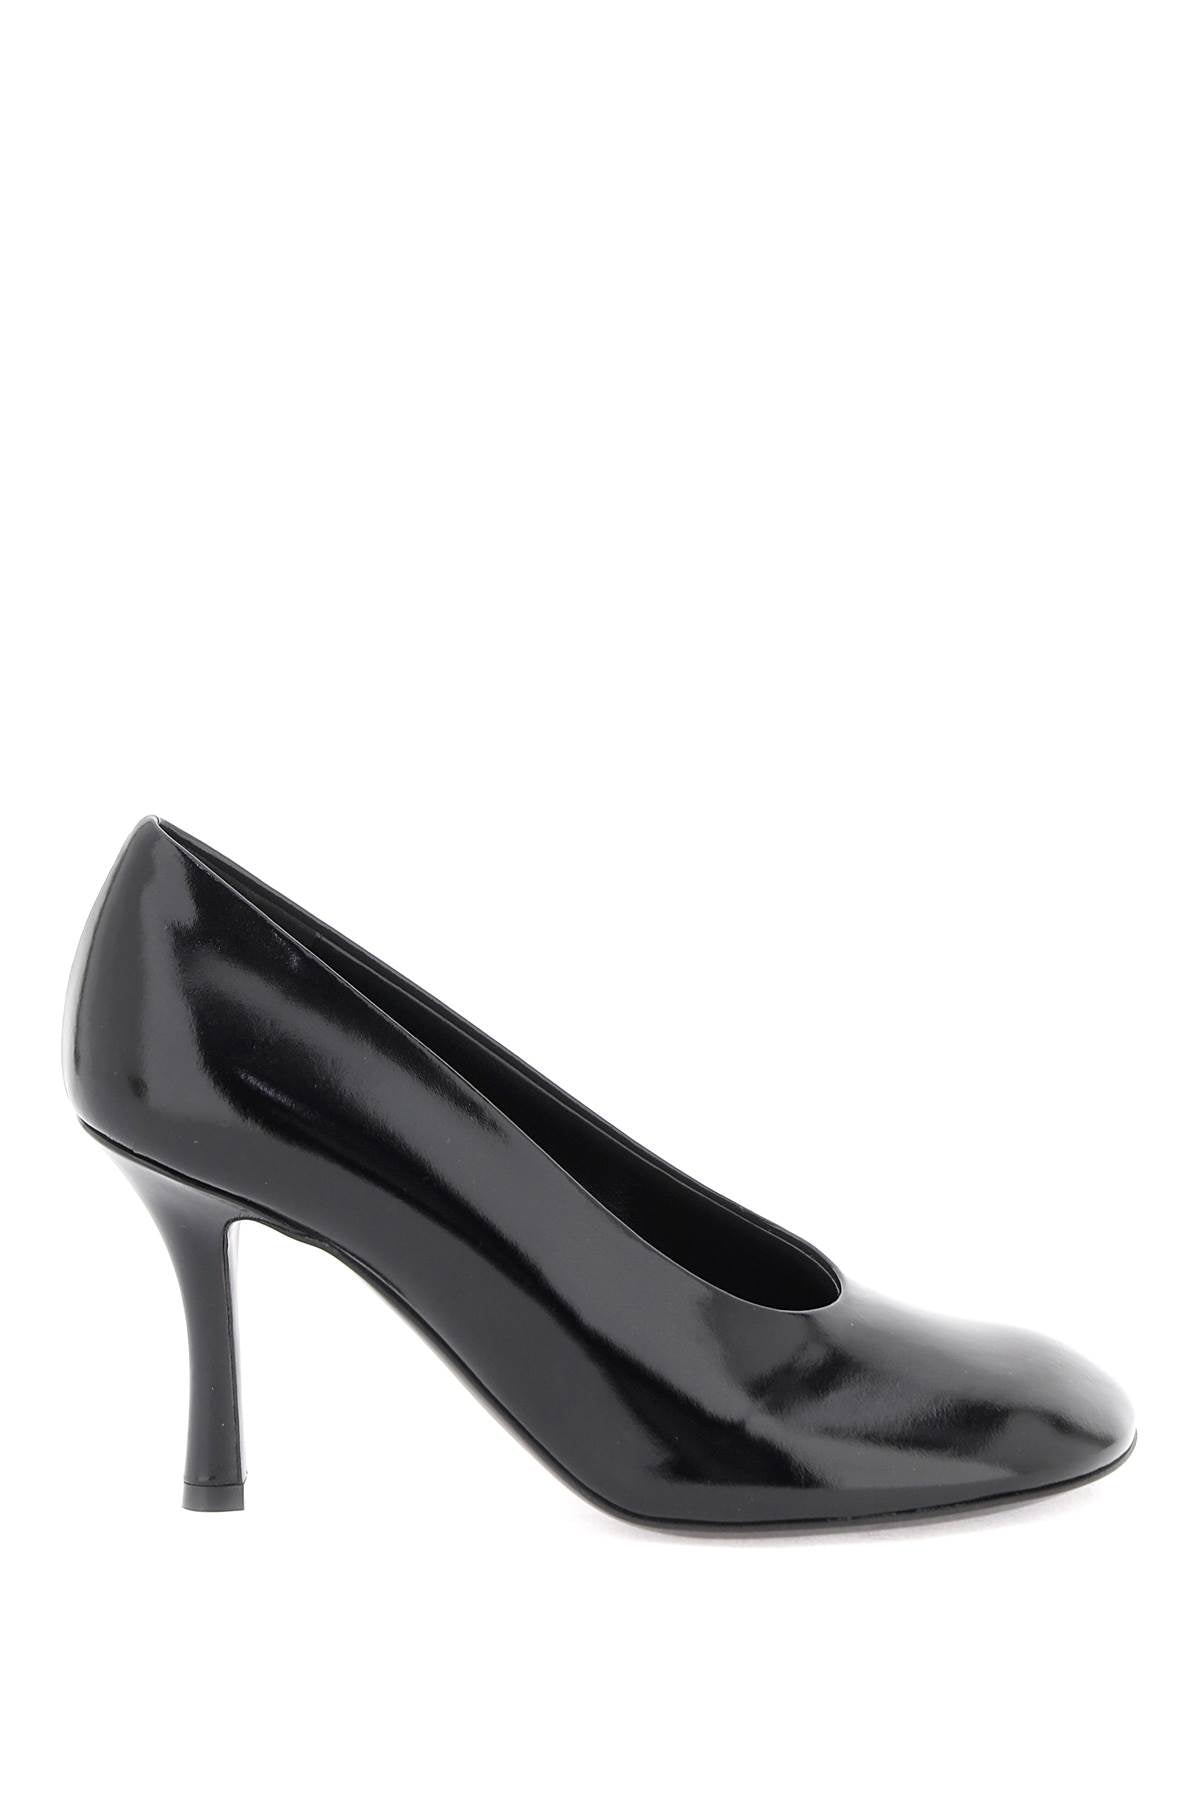 Burberry glossy leather baby pumps 8080429 BLACK